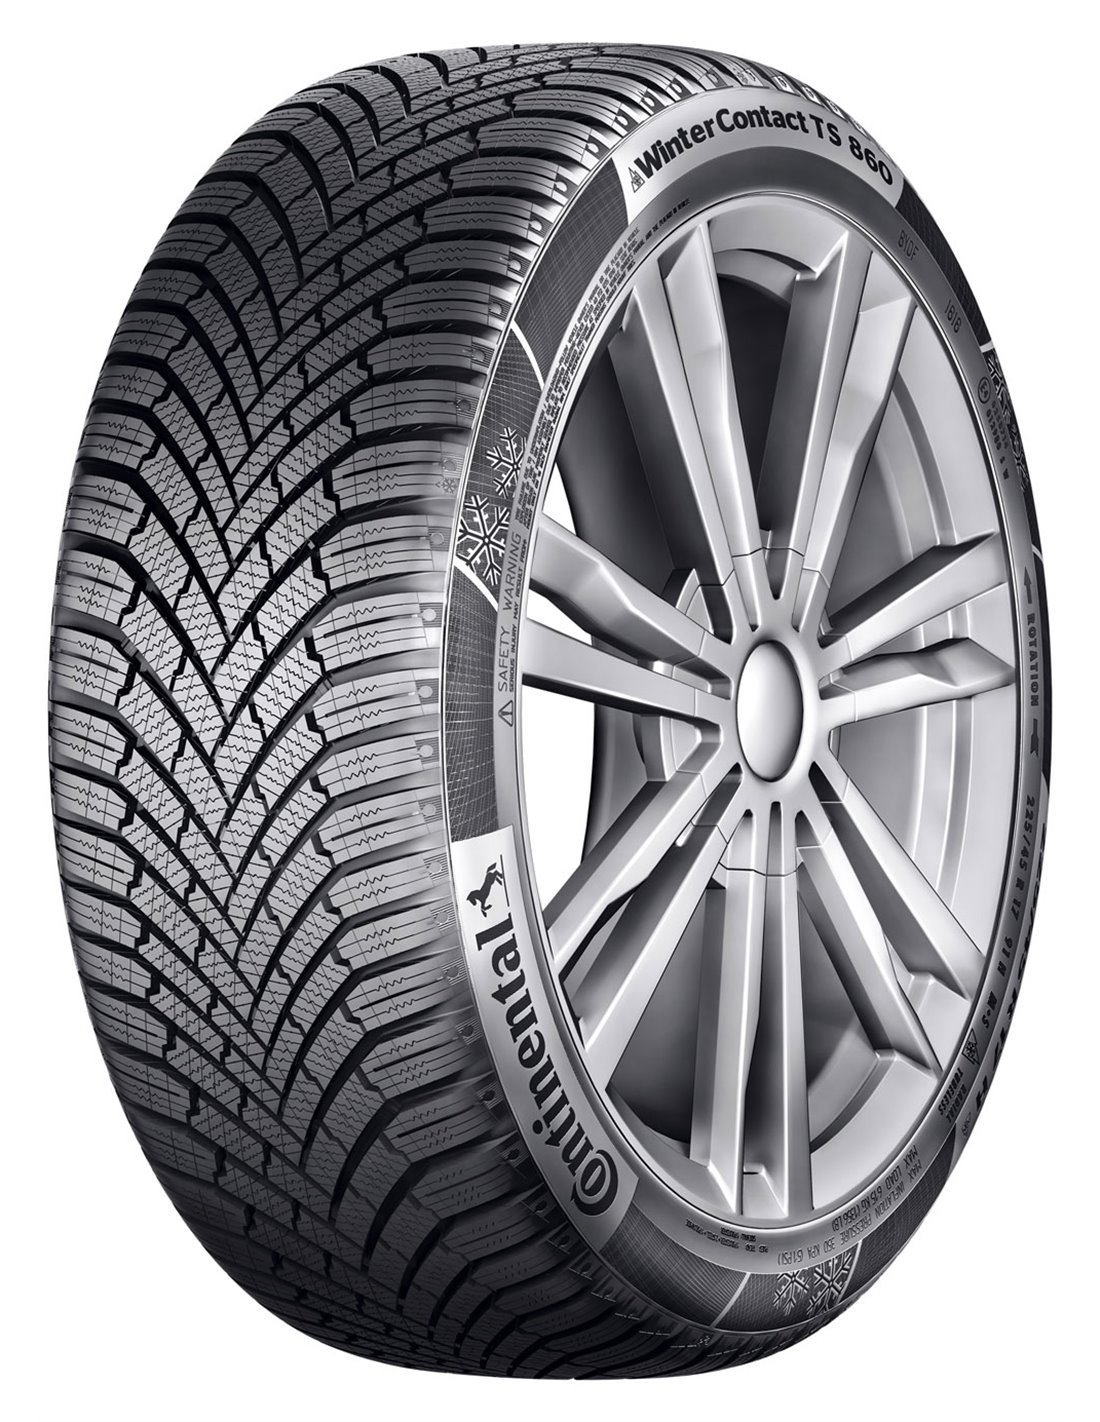 CONTINENTAL WINTCONTACT TS 860 185/55 R14 80T